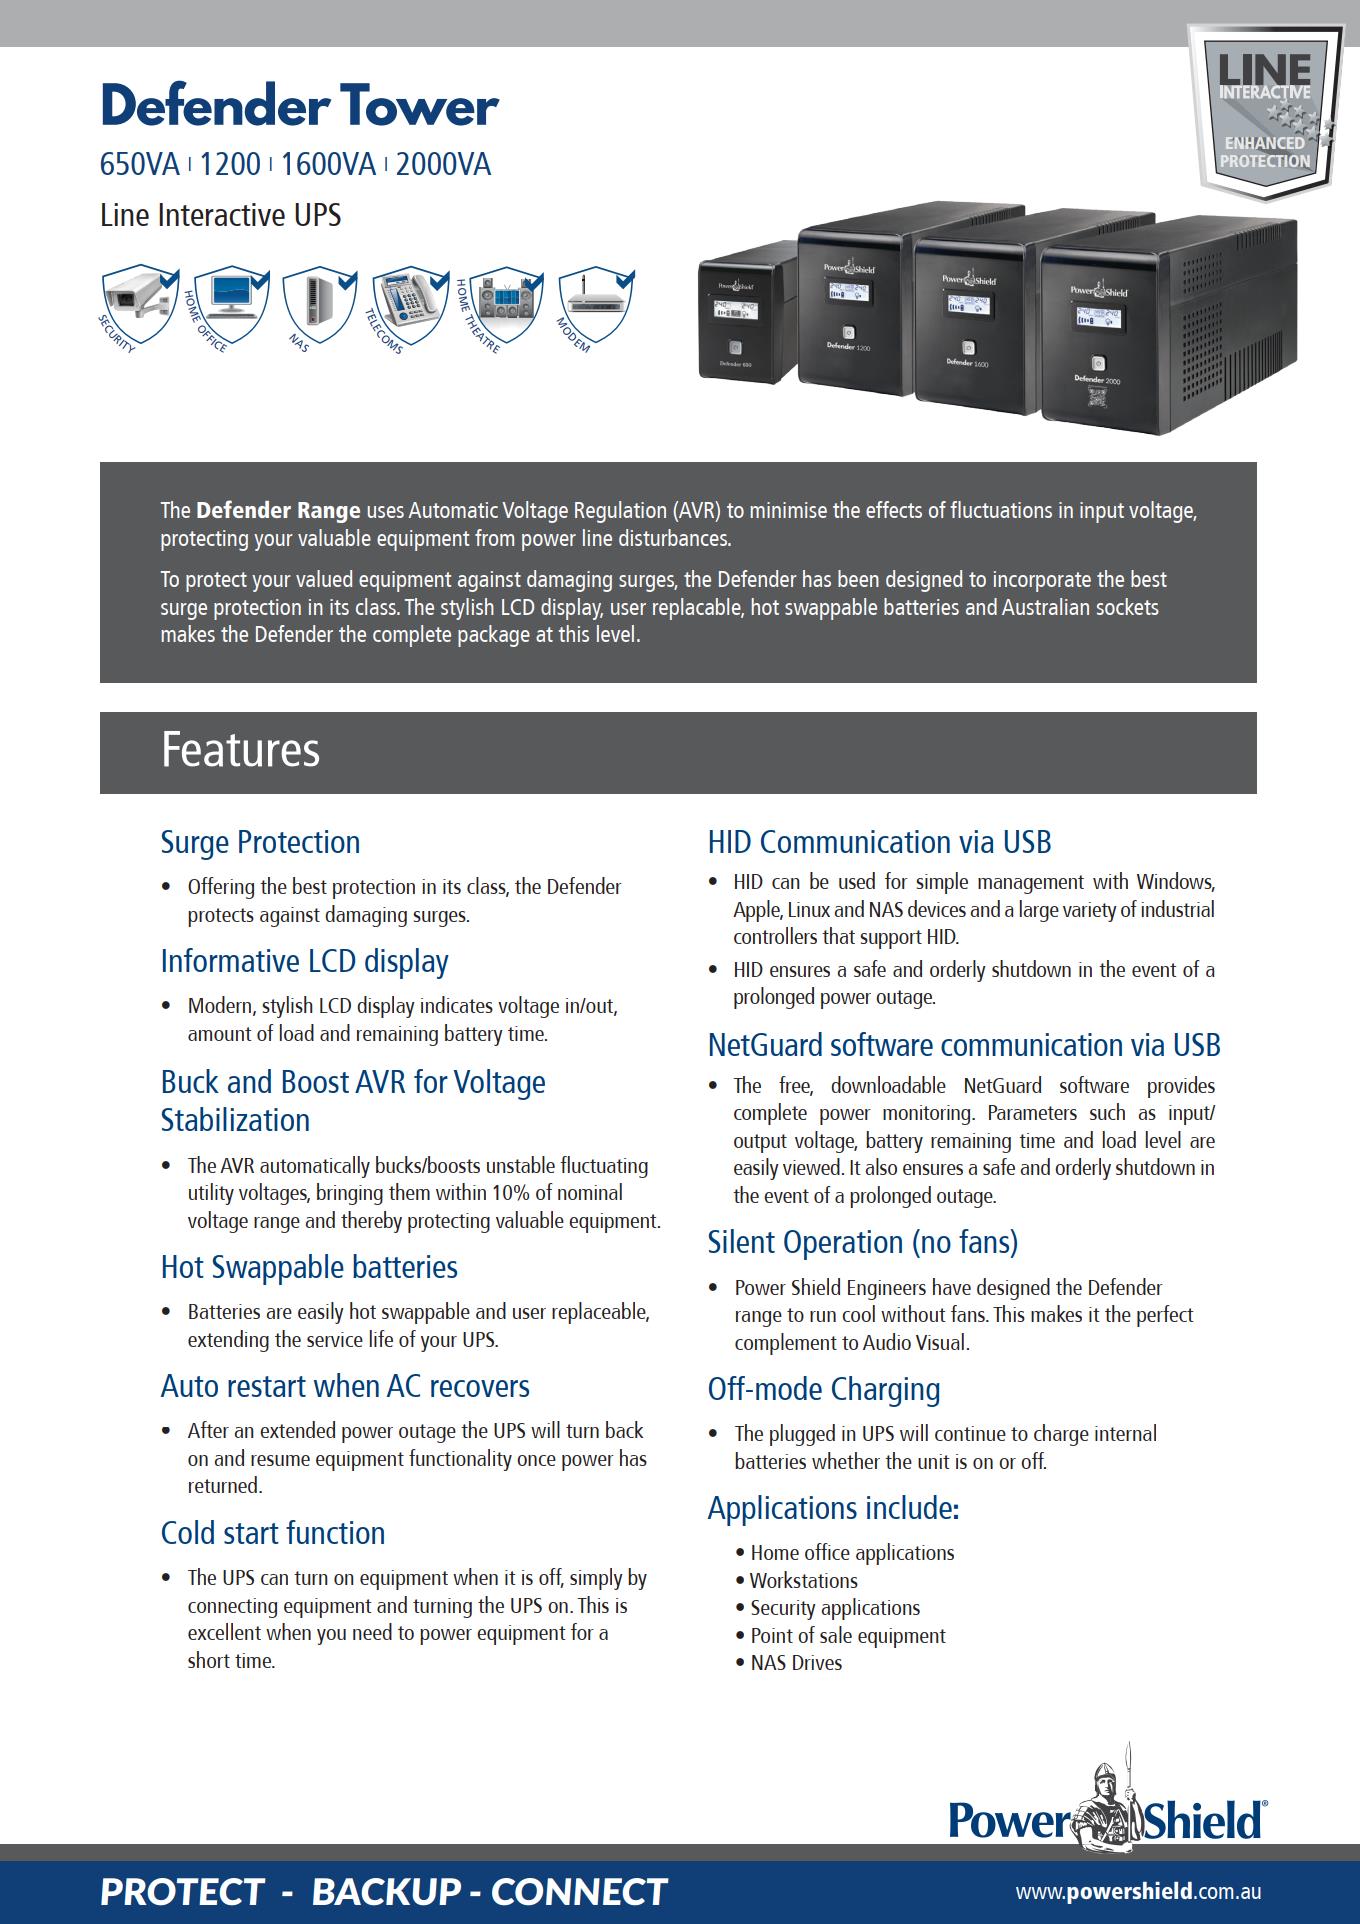 A large marketing image providing additional information about the product PowerShield Defender LCD 1.2KVA UPS - Additional alt info not provided